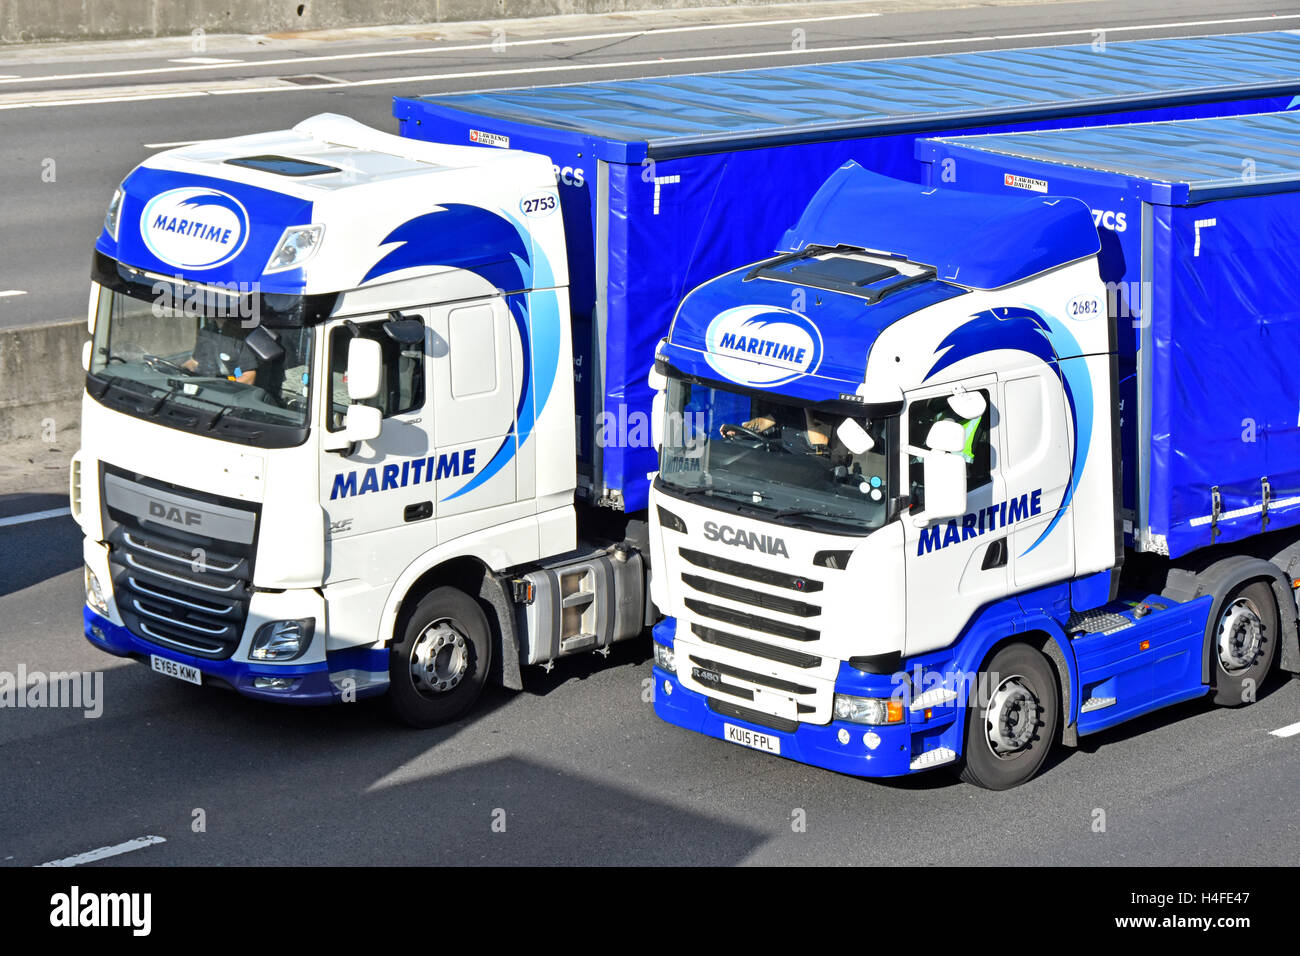 Close up two lorry cabs & trailer with driver from Maritime logistics company hgv truck drivers stuck in cab in traffic jam on m25 England UK motorway Stock Photo